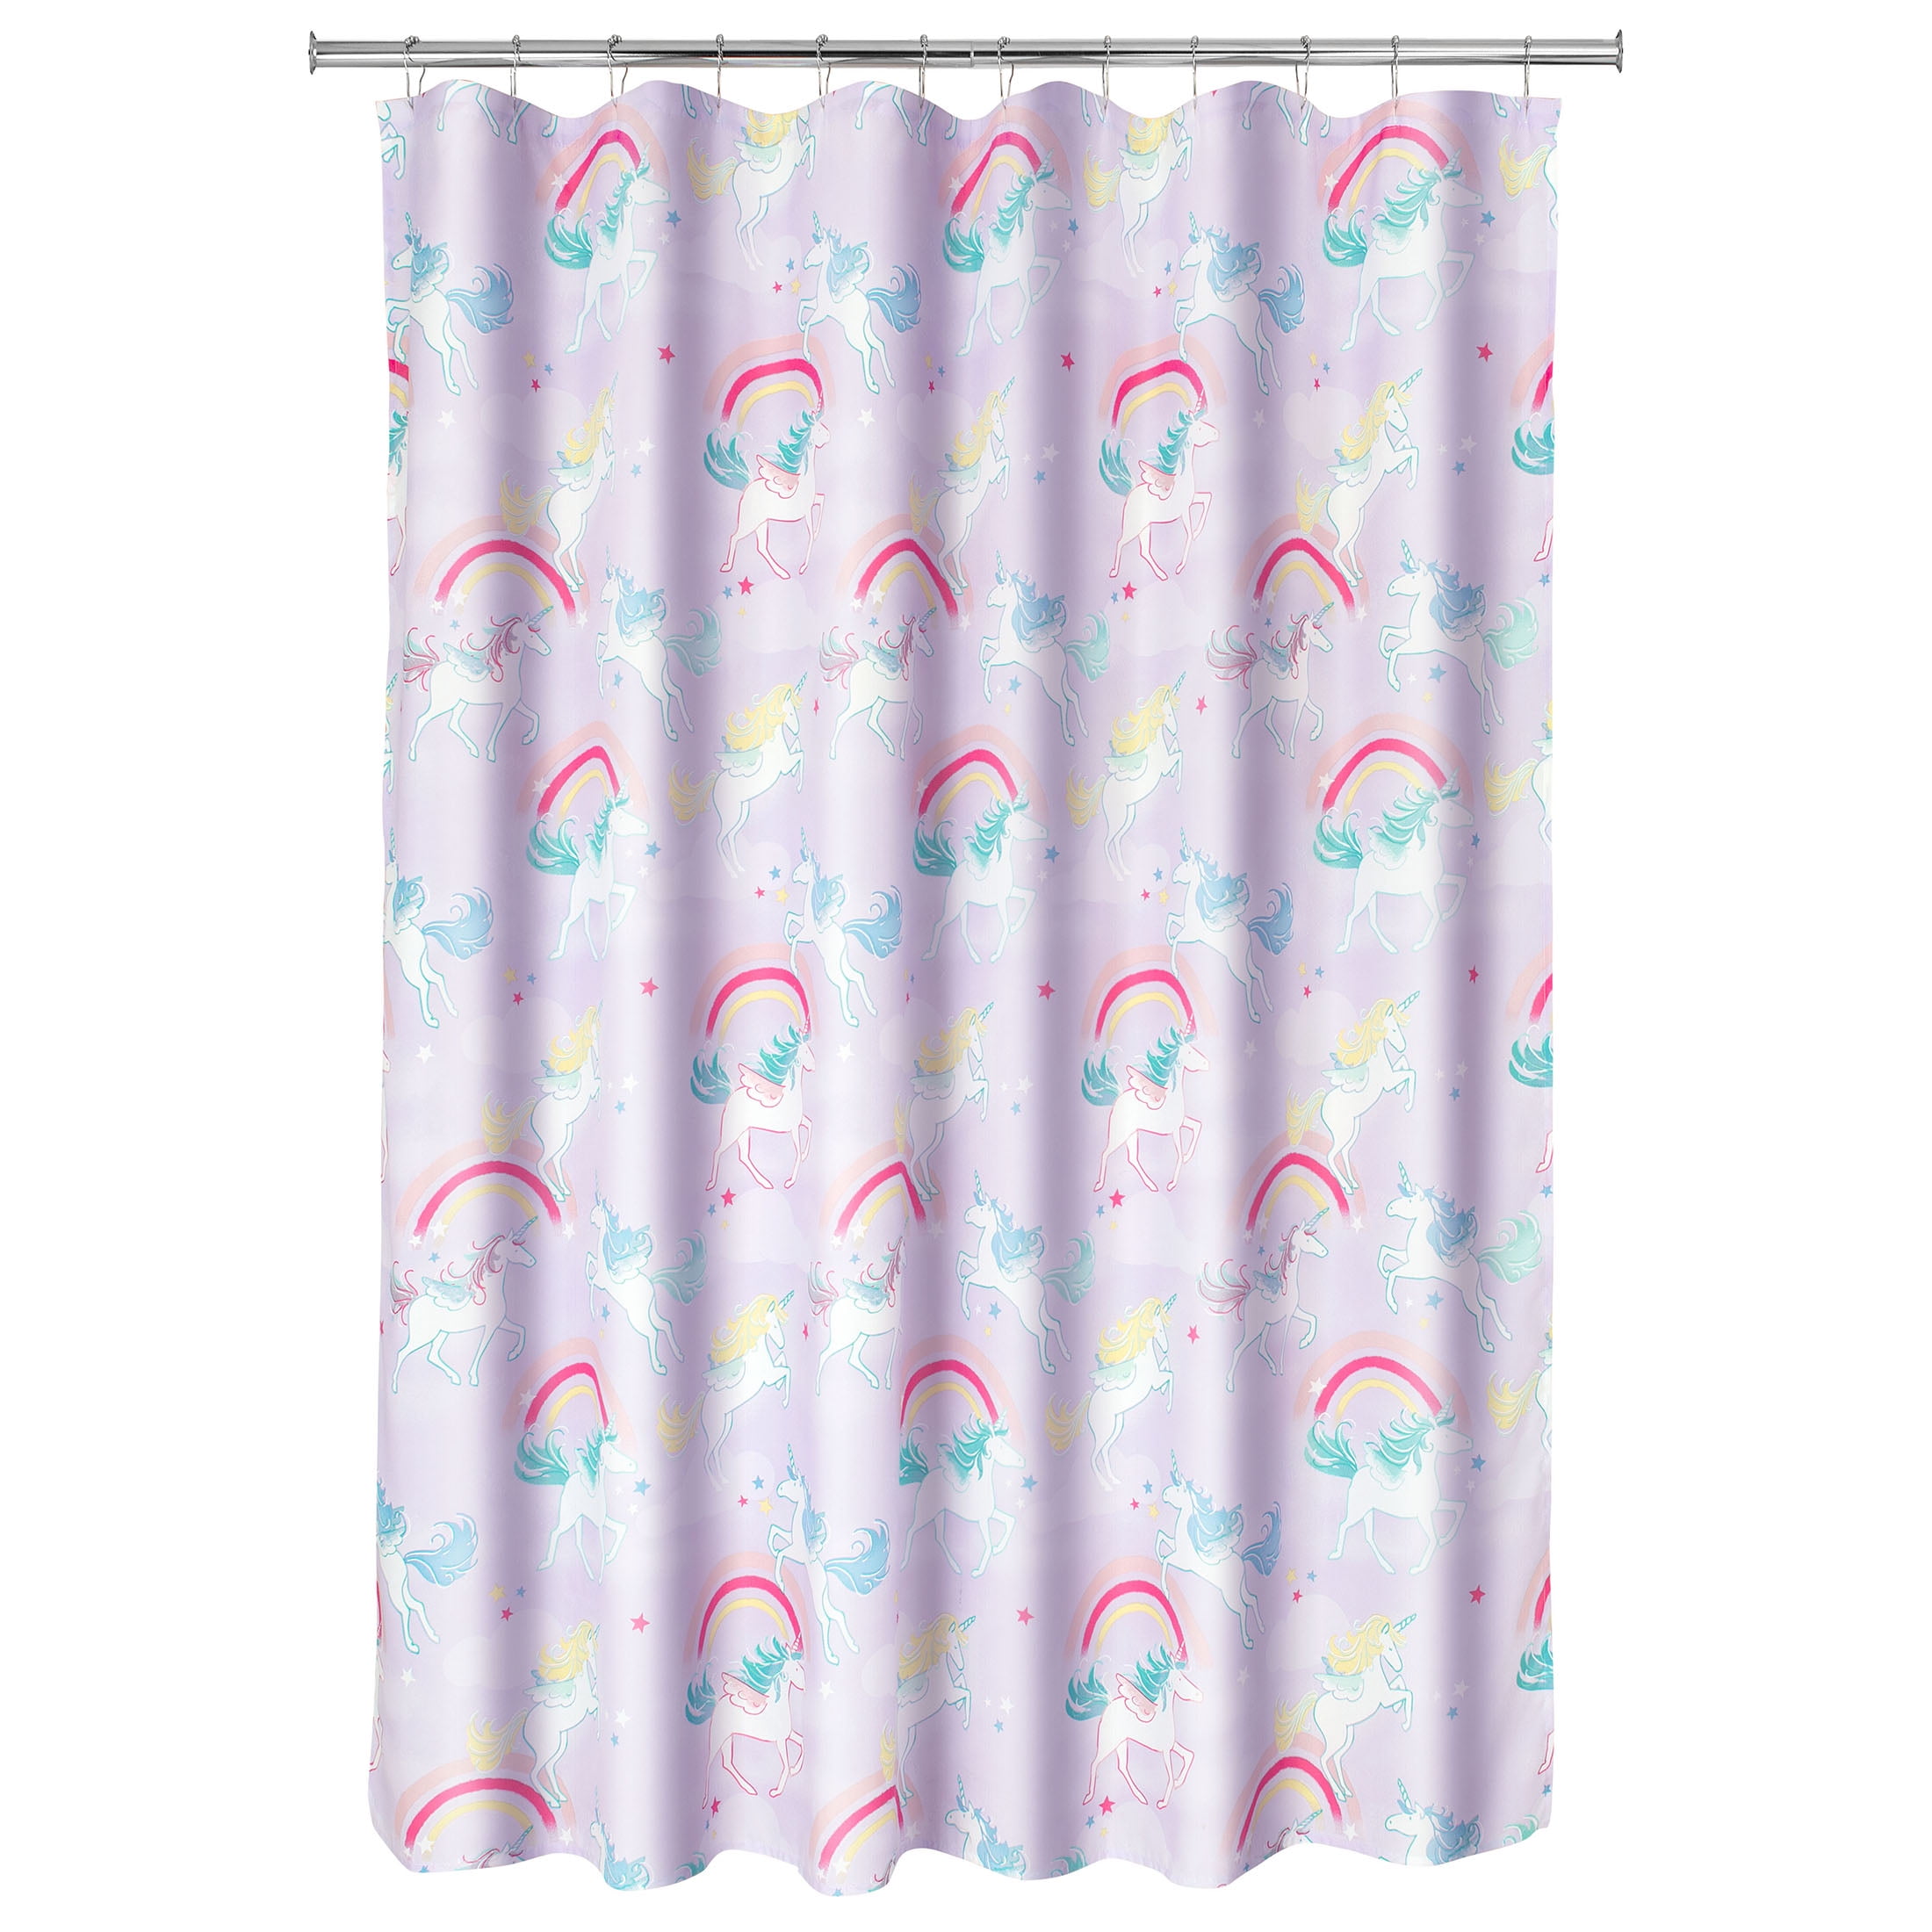 Unicorn Fabric Shower Curtain by Your Zone, Multi Print, 72" x 72"